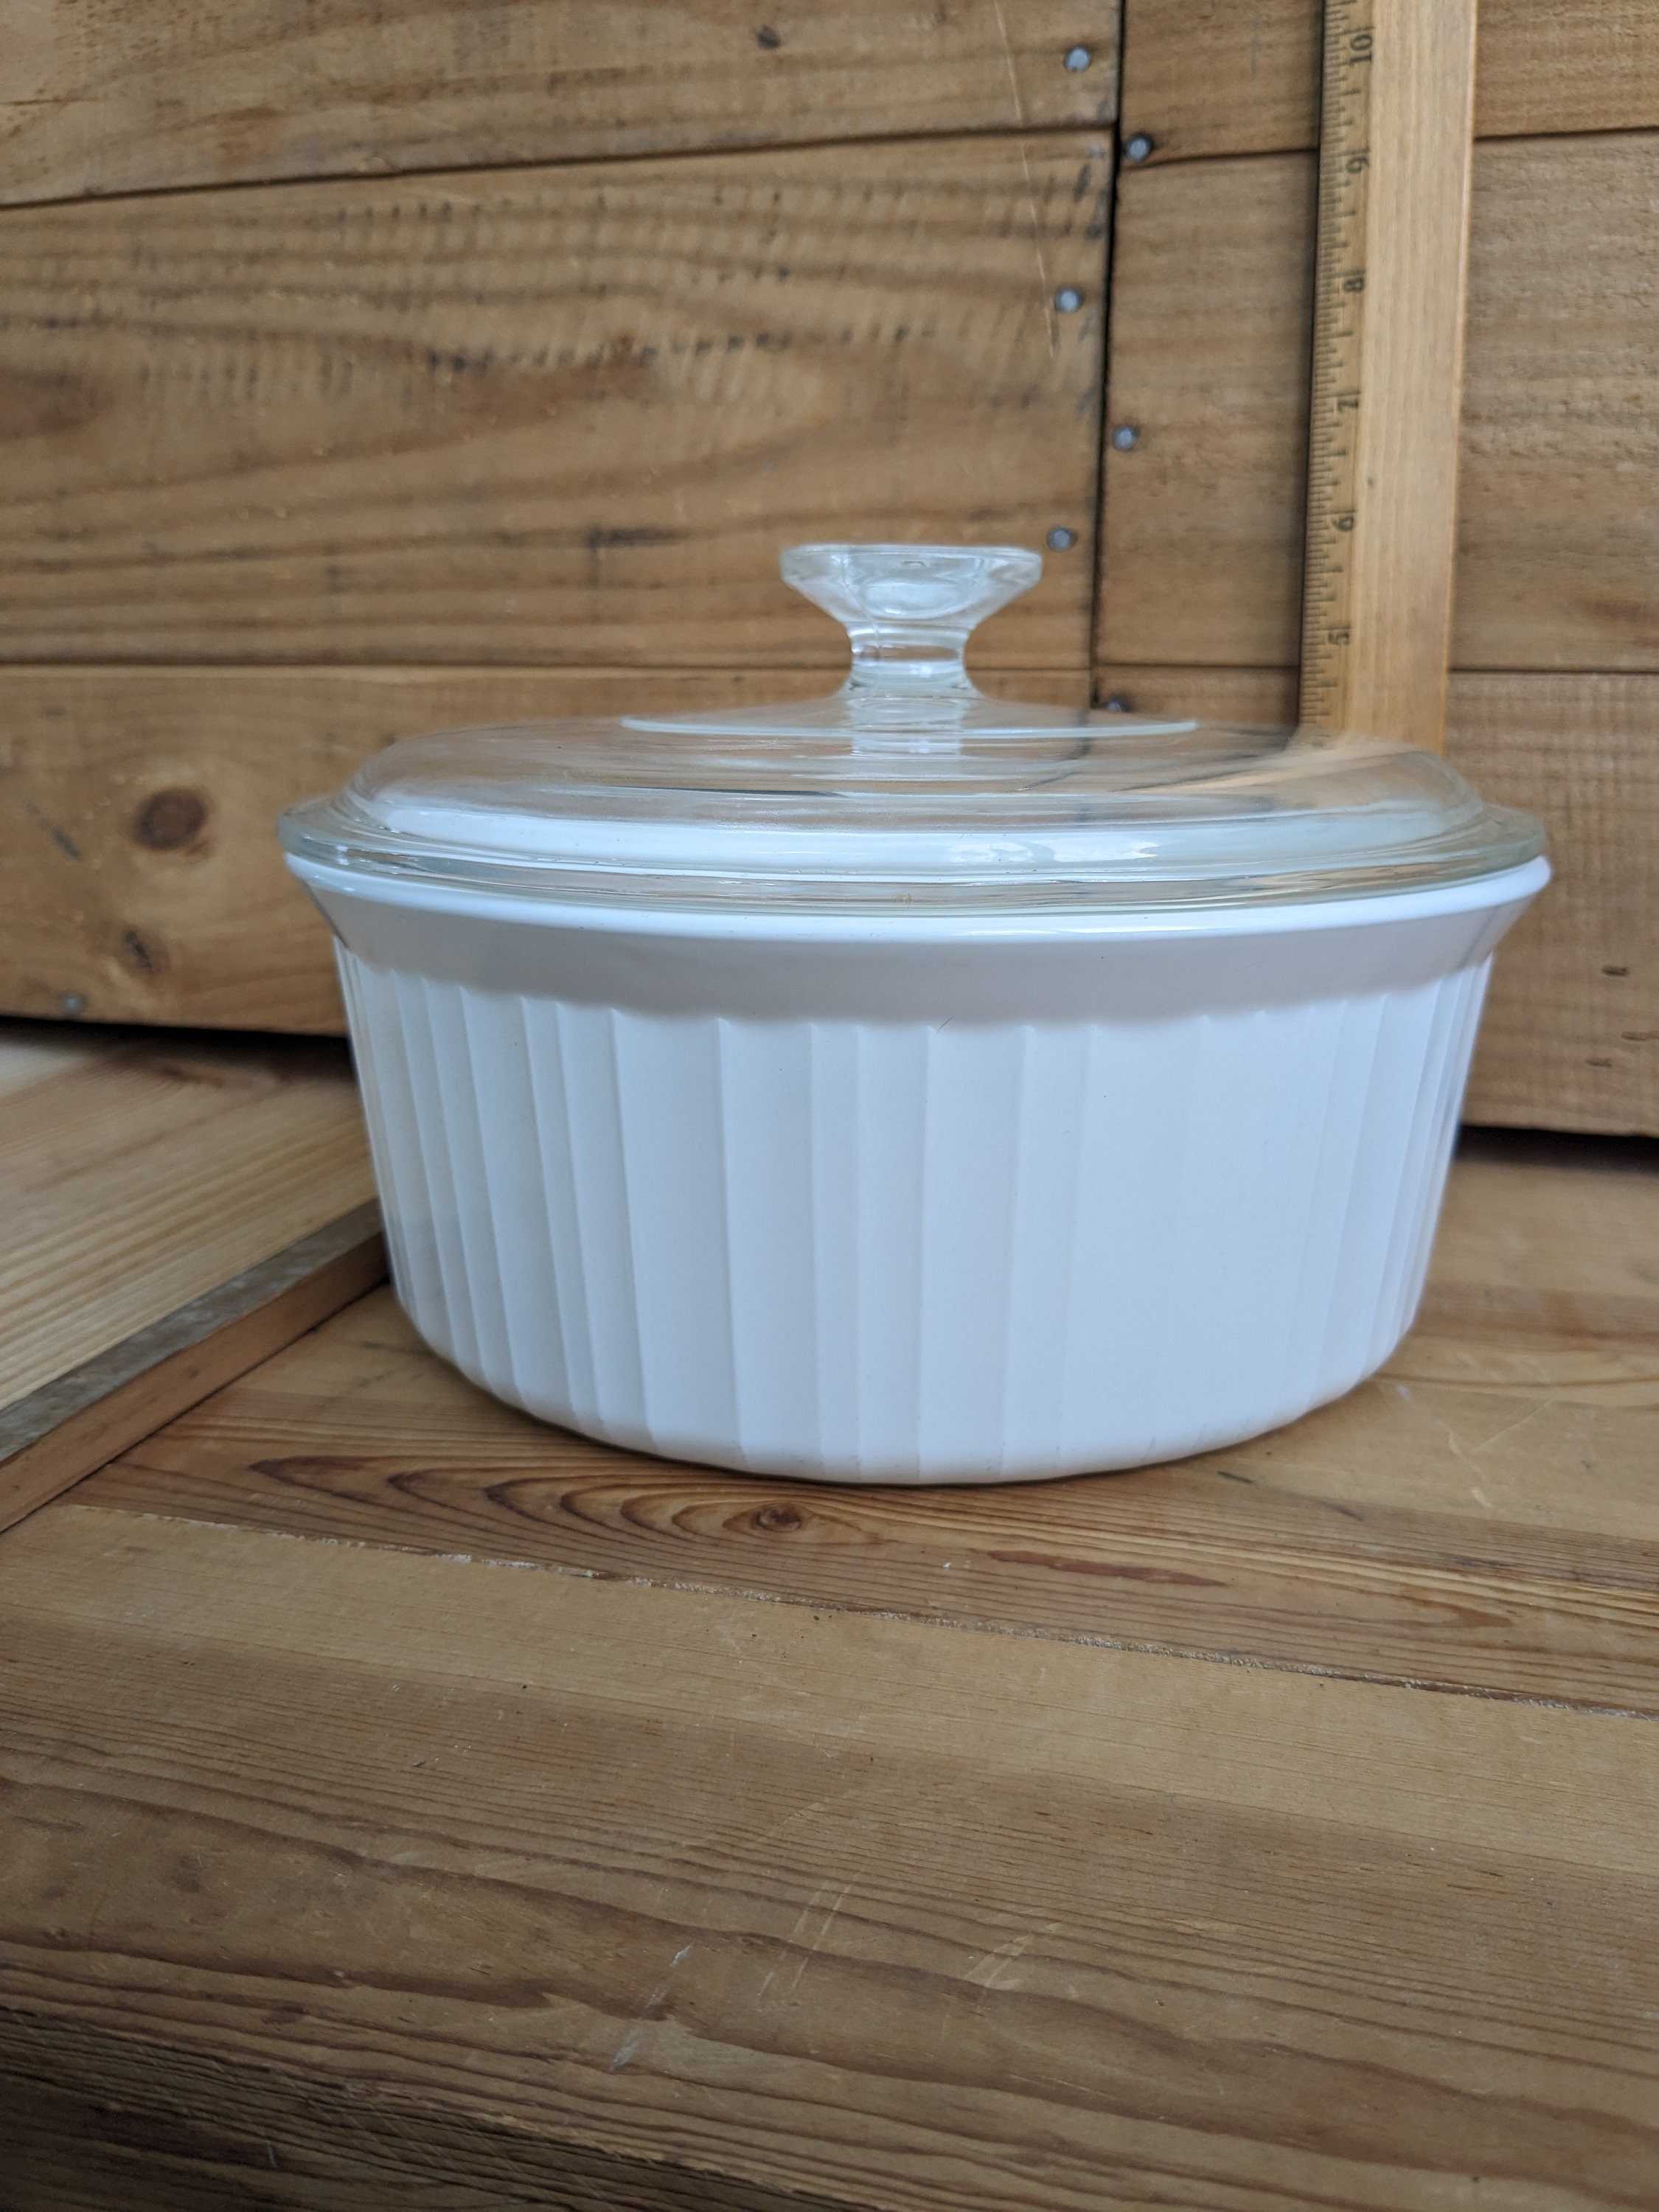 French White 1.5-quart Round Casserole Dish with Lid